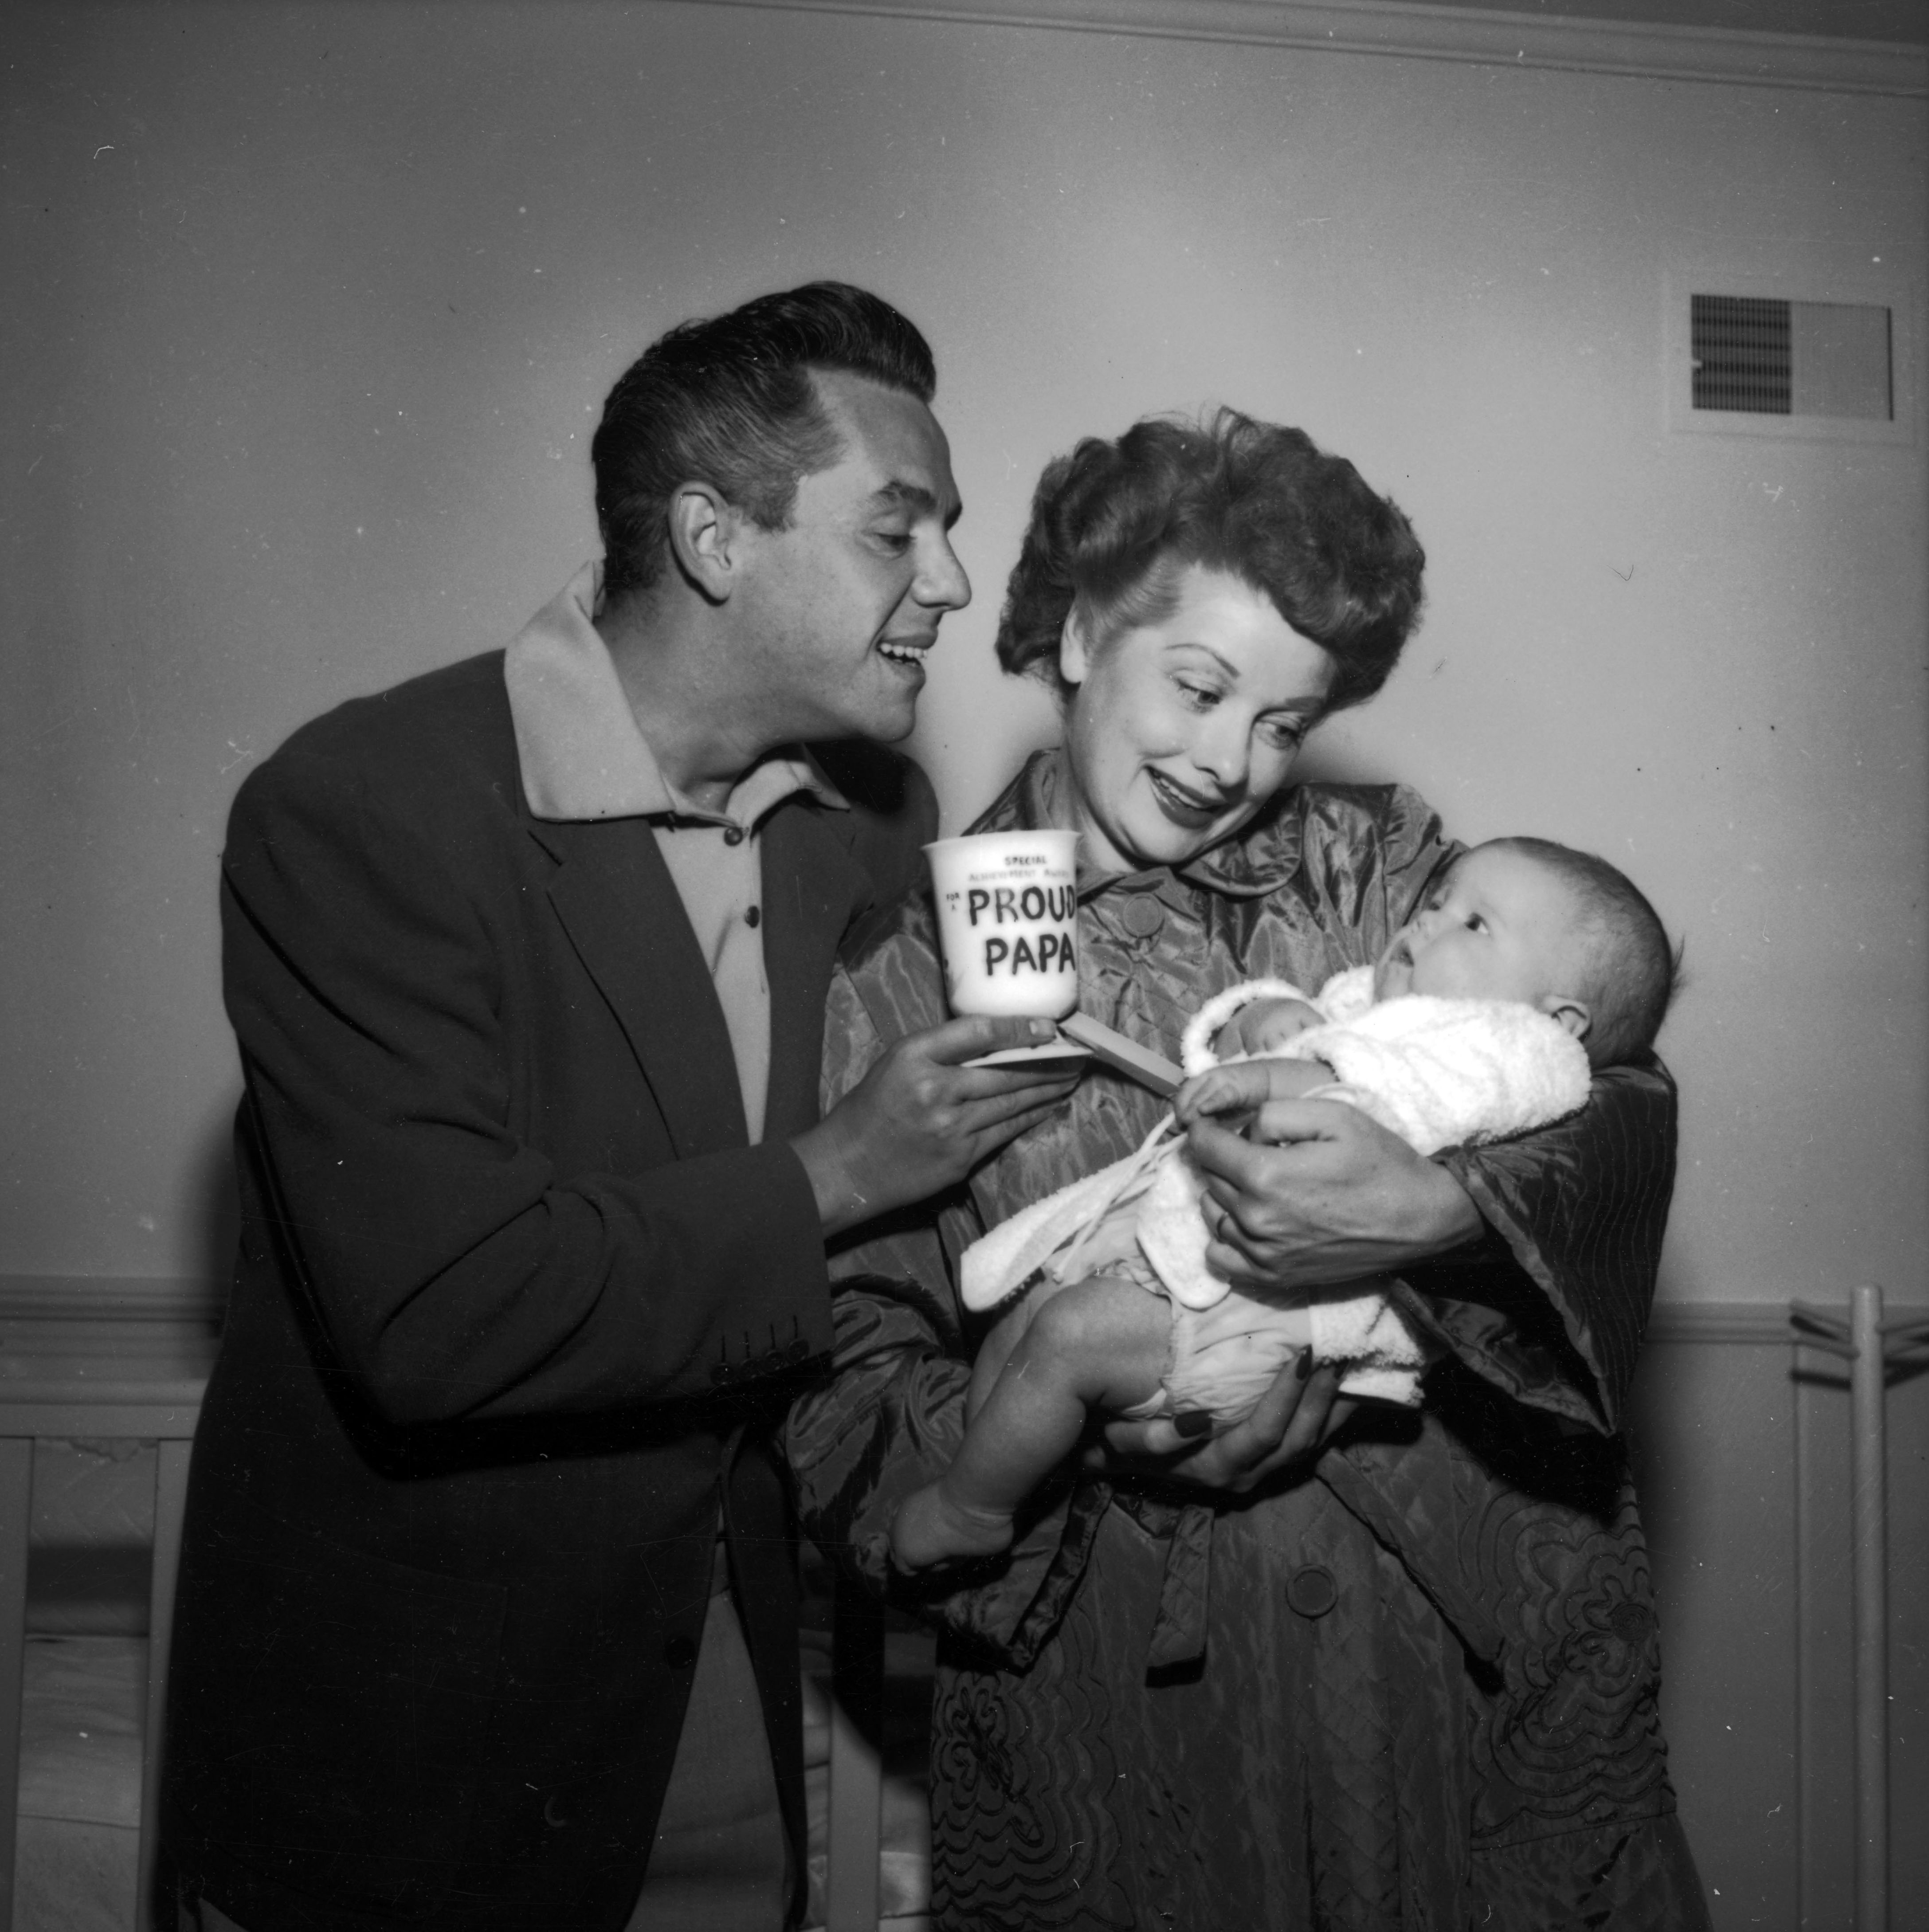 Lucille Ball at home with her husband Desi Arnaz and their son Desi Jr., 1953. Desi Sr. is holding a mug with the caption 'Proud Papa' on it.